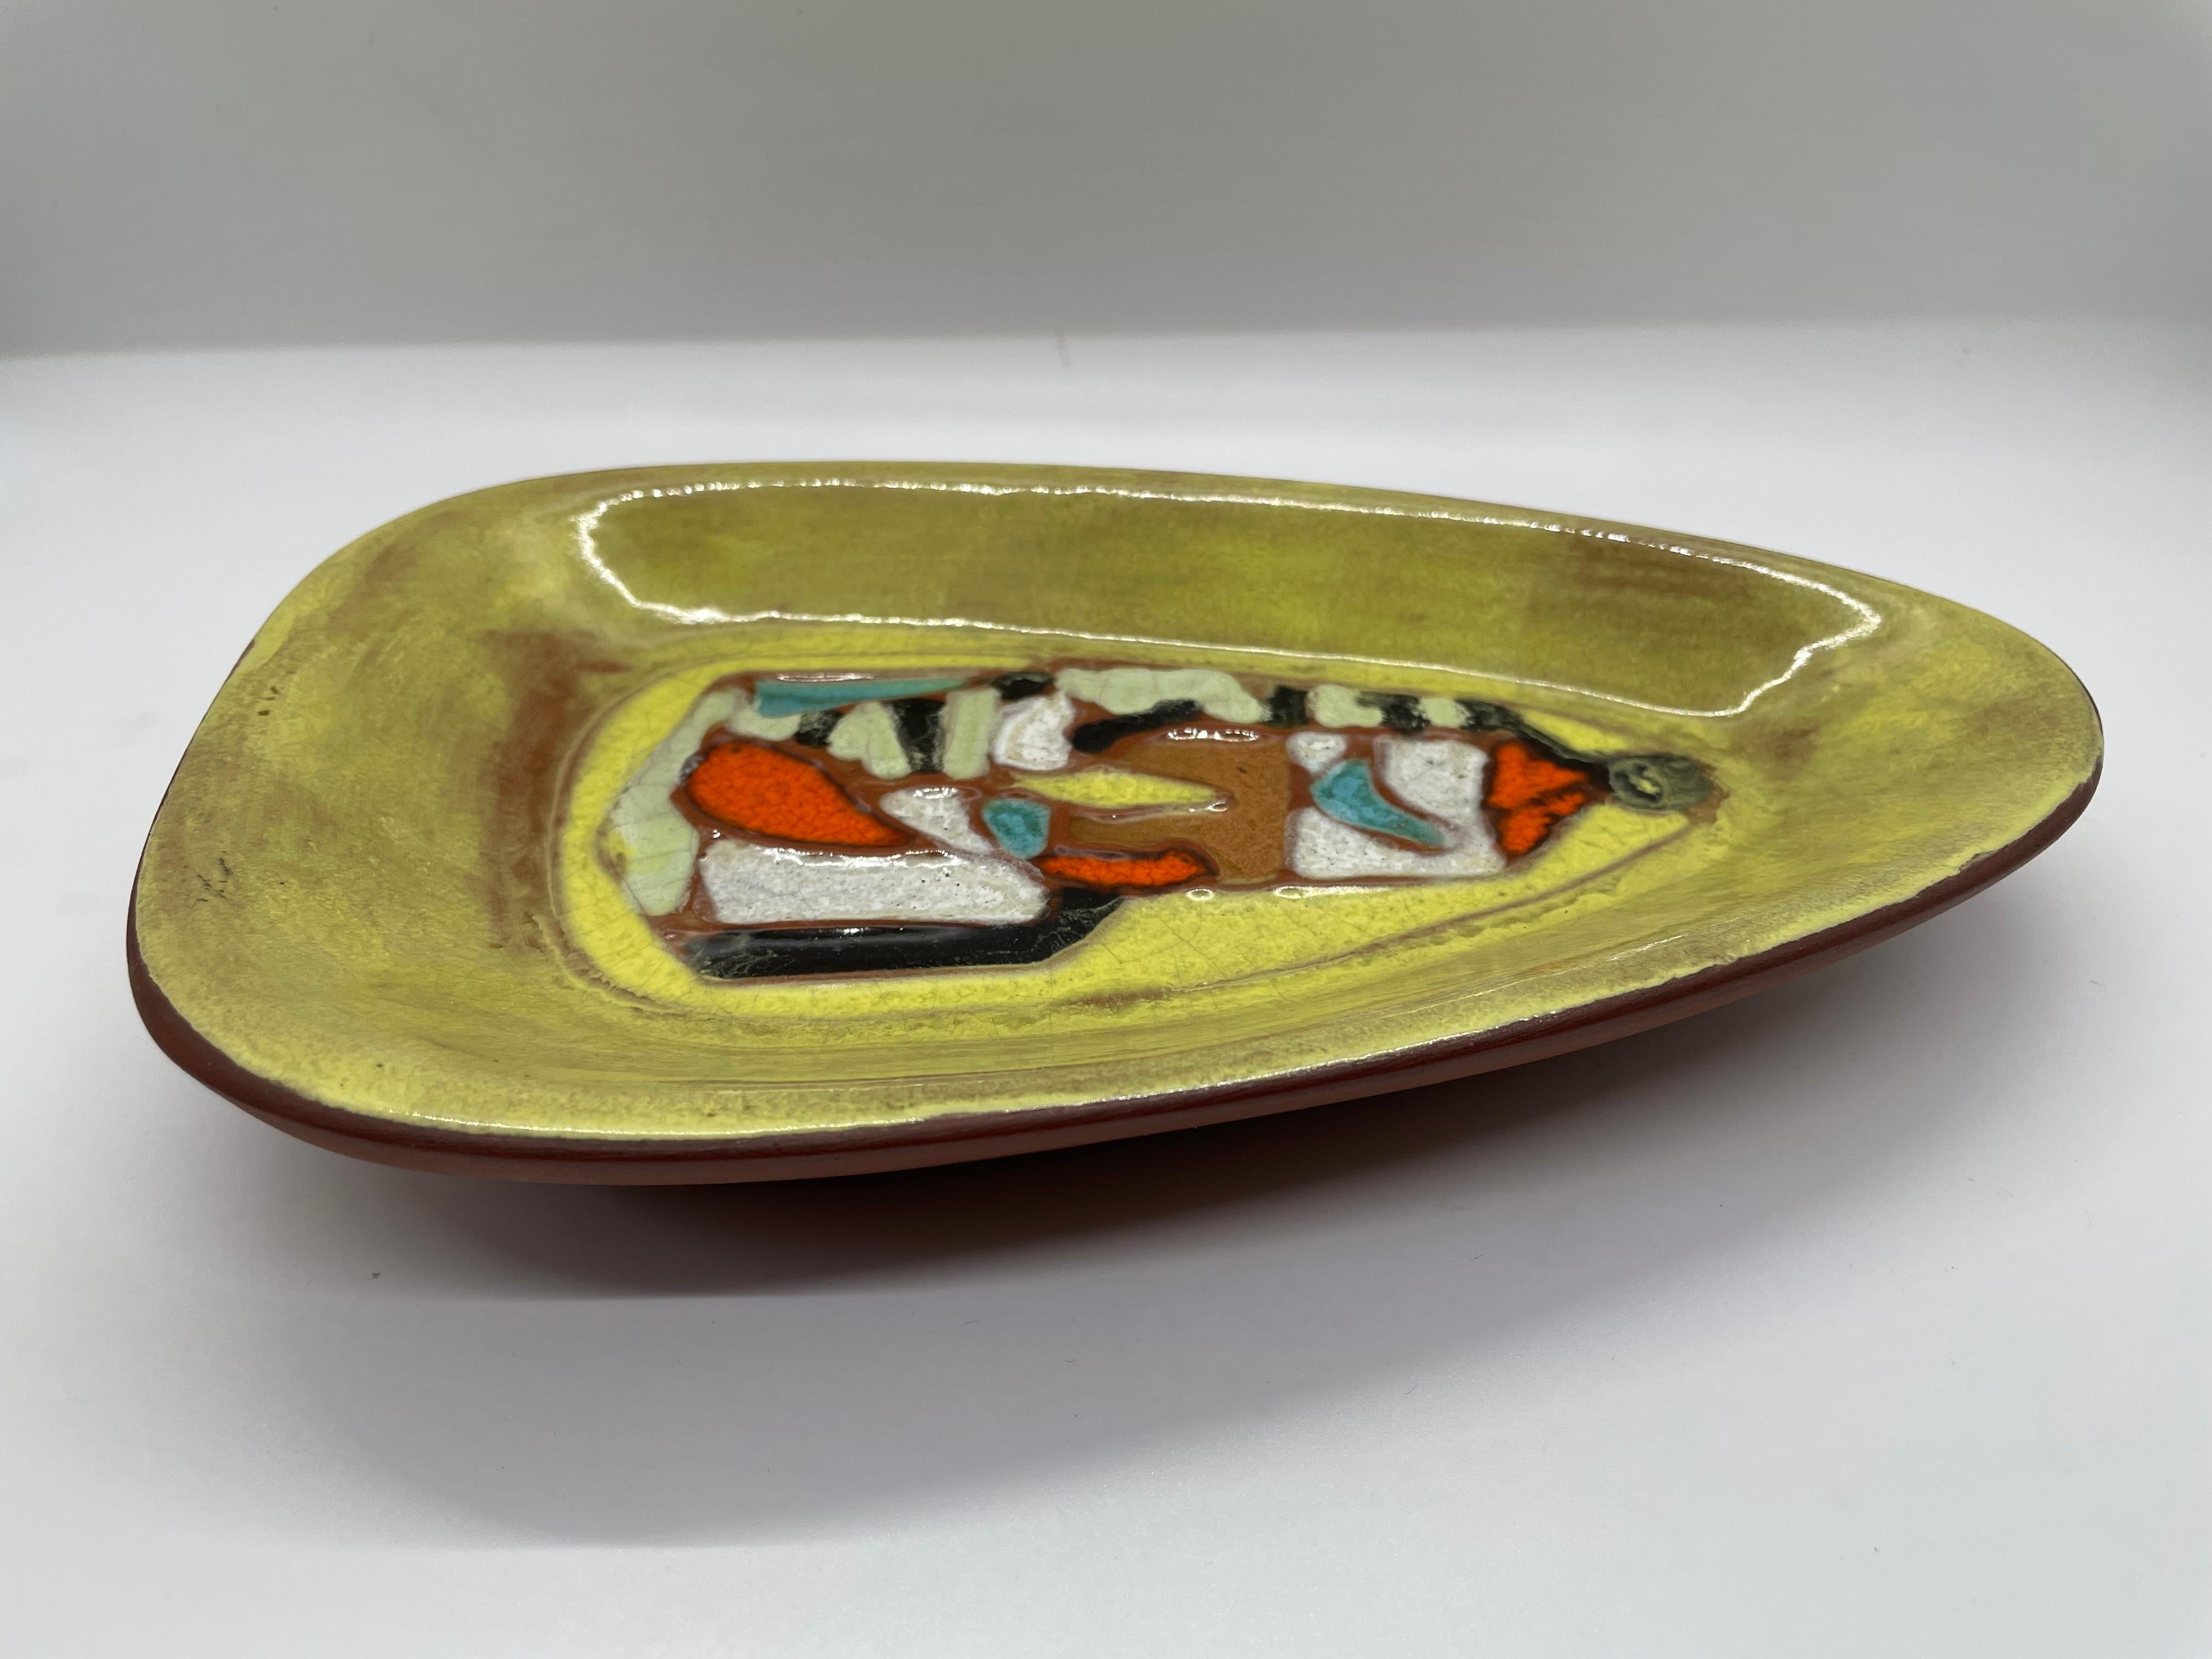 Unique shape, great colors and fabulous glaze makes this Harris Strong mid century ceramic dish a perfect accent piece!.